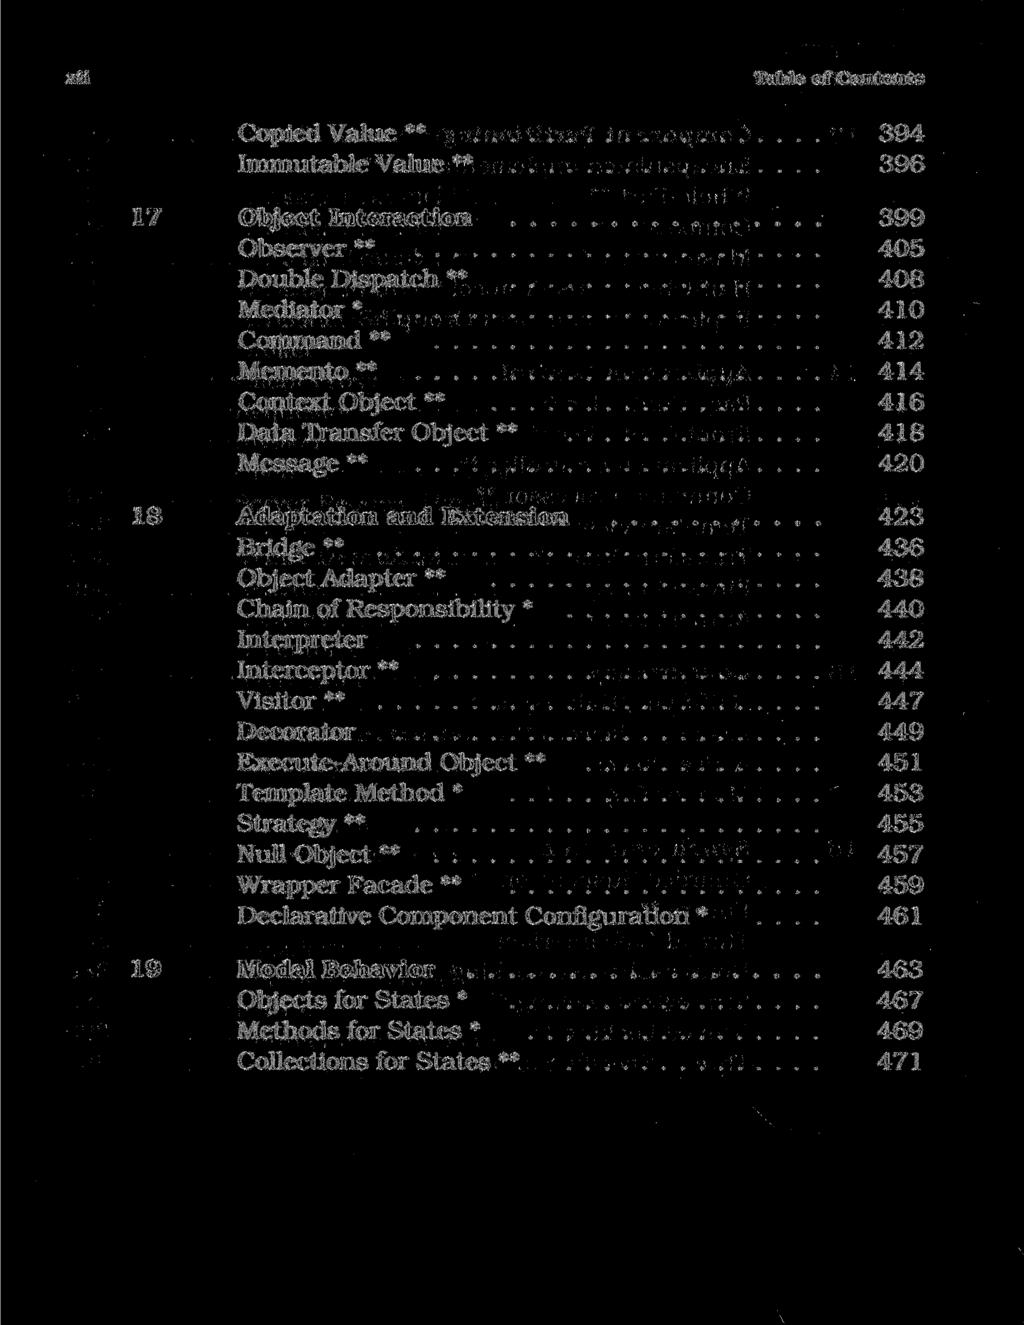 xii Table of Contents Copied Value ** 394 Immutable Value ** 396 17 Object Interaction 399 Observer ** 405 Double Dispatch ** 408 Mediator * 410 Command ** 412 Memento ** 414 Context Object ** 416